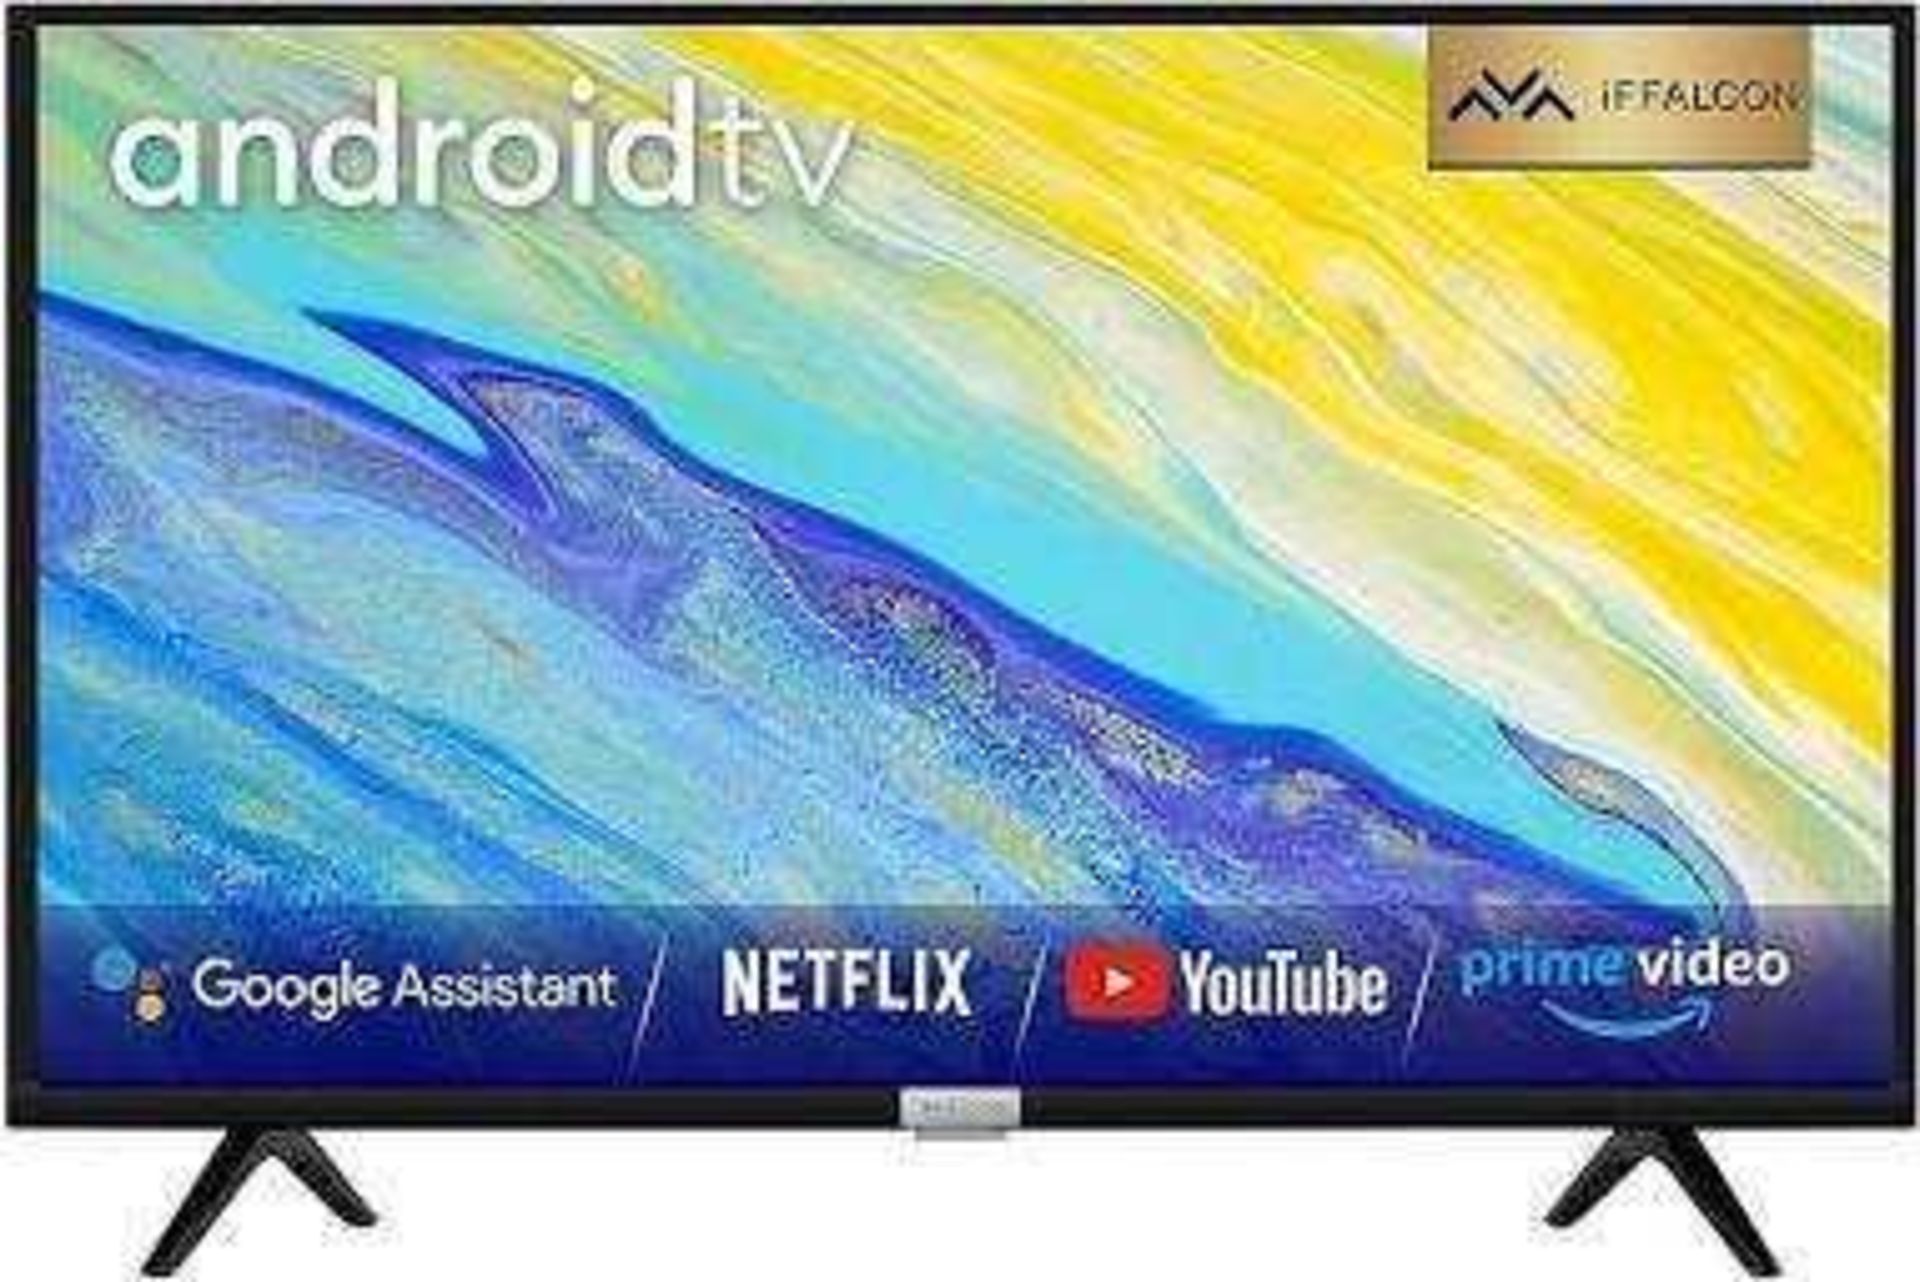 RRP £150 32"Iffalcon Android Tv - 32F51Ob